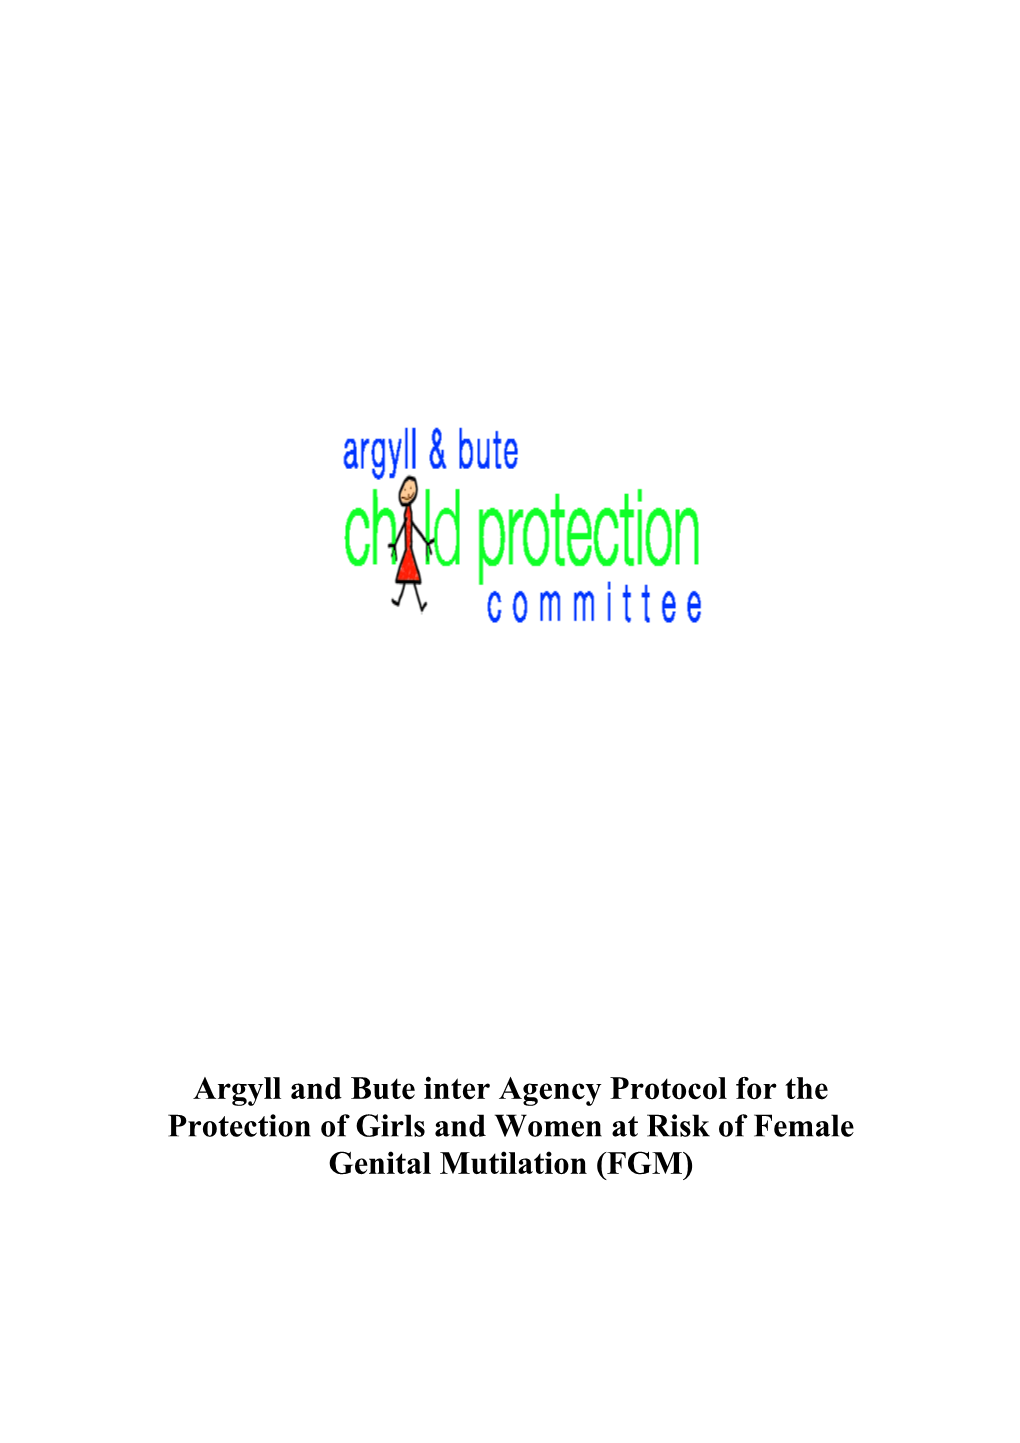 Argyll and Bute Inter Agency Protocol for the Protection of Girls and Women at Risk Of